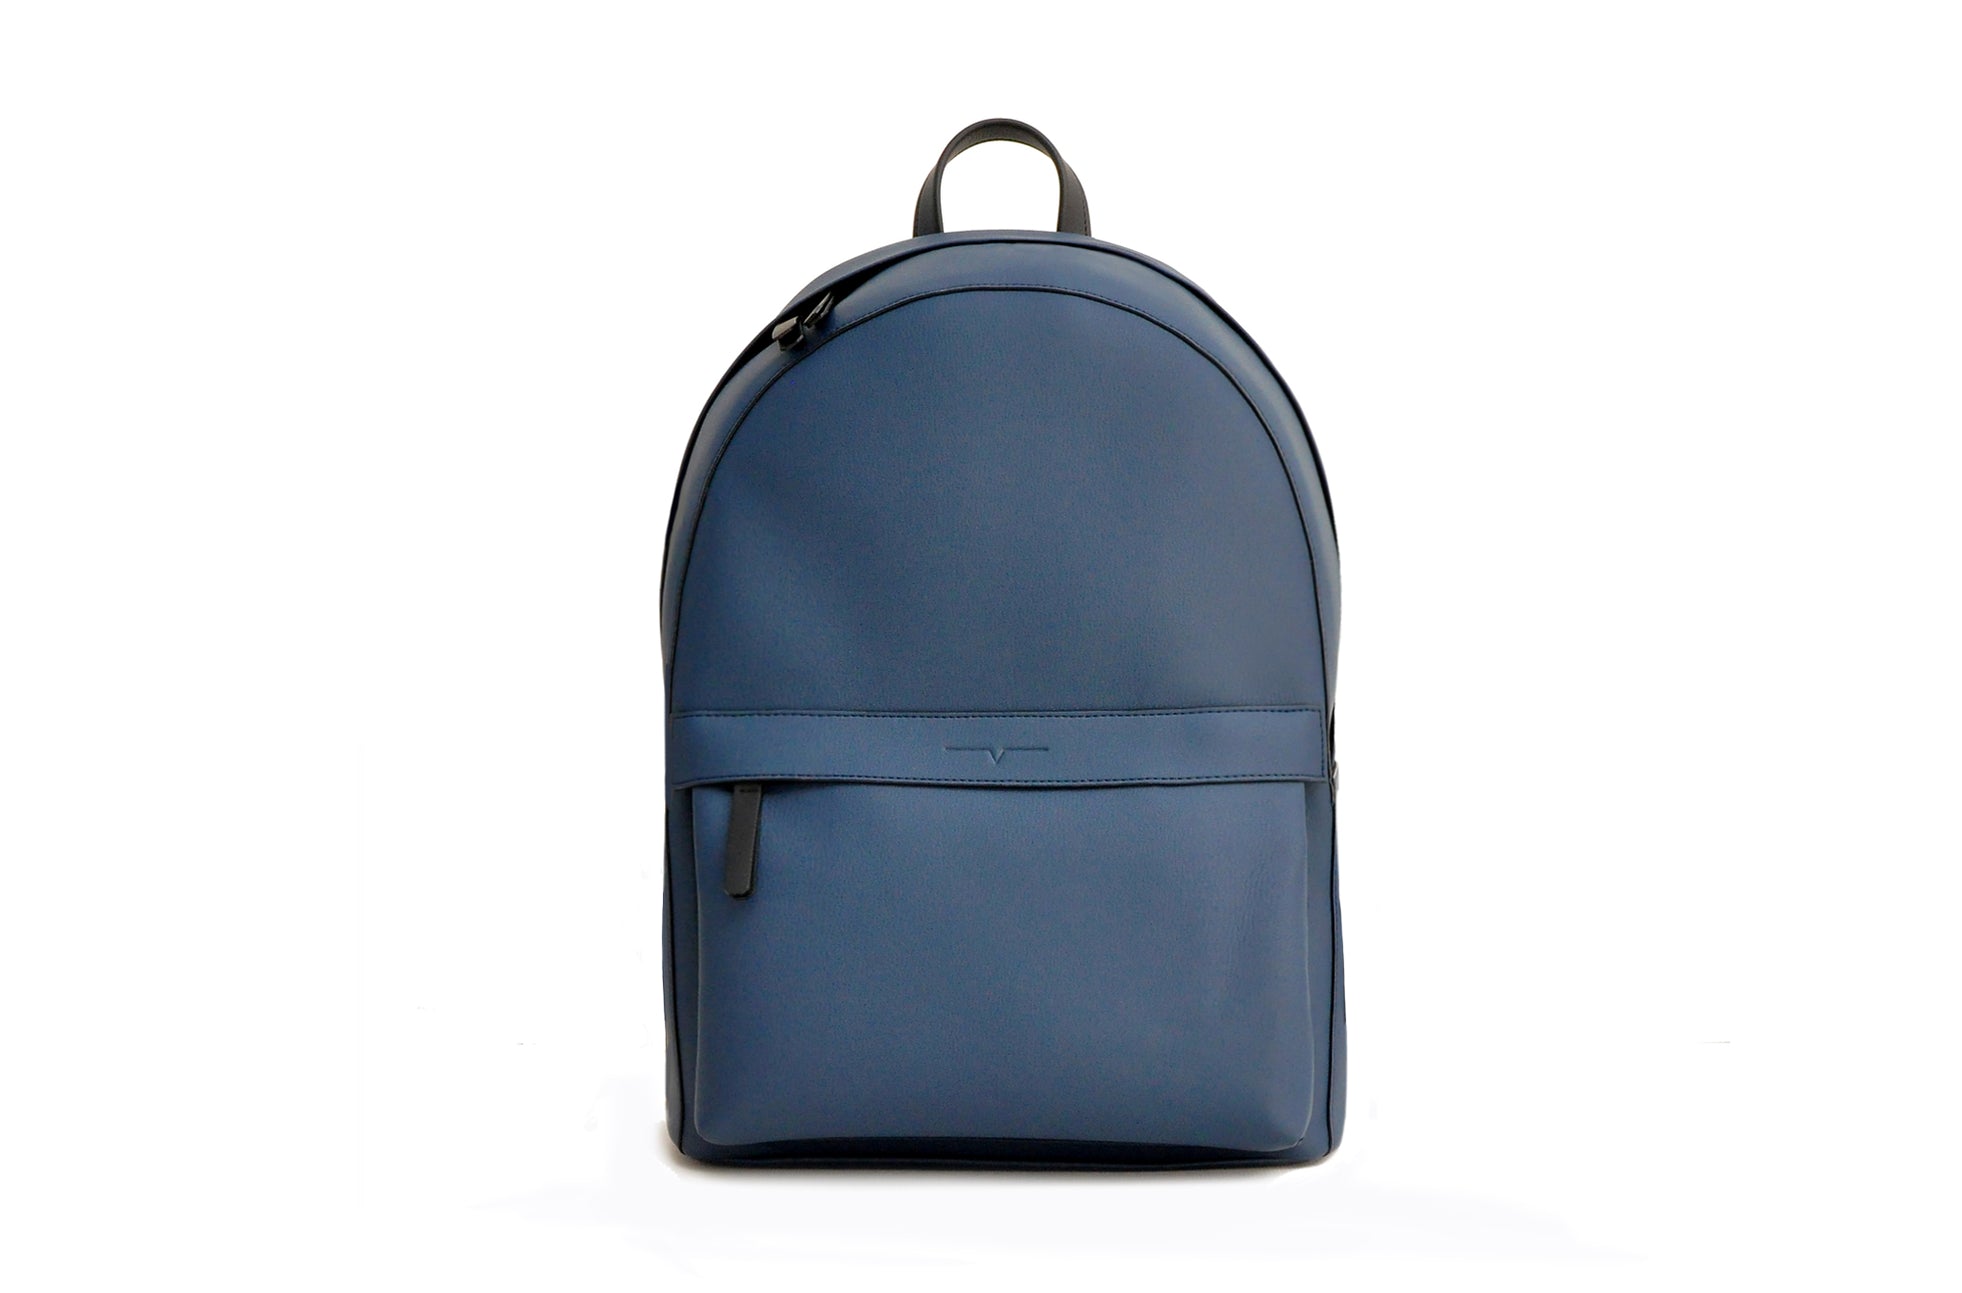 The Classic Backpack in Technik-Leather in Denim and Black image 1